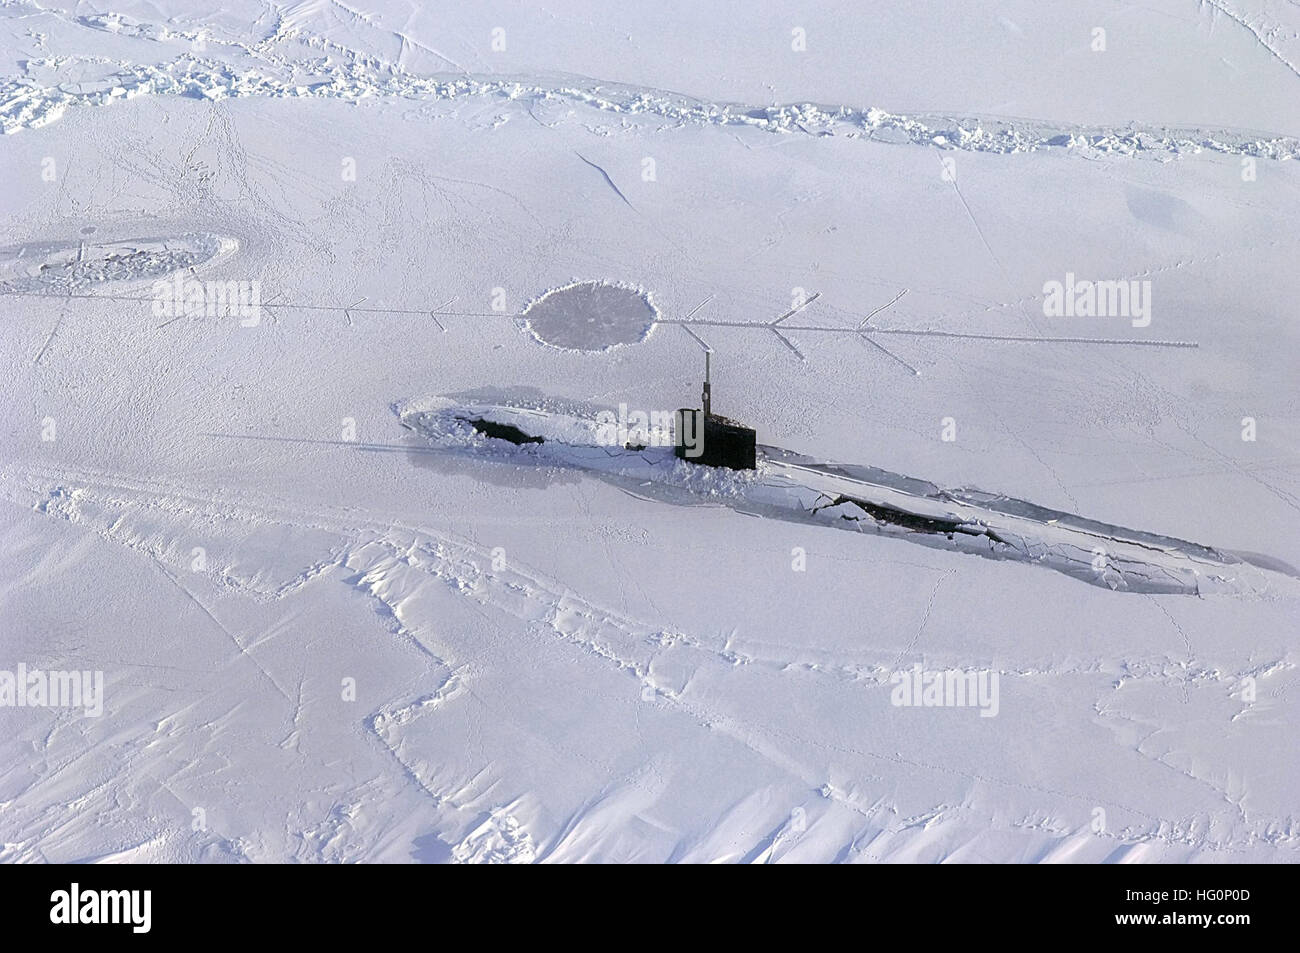 US Navy 070318-N-3642E-473 Los Angeles-class fast attack submarine USS Alexandria (SSN 757) is submerged after surfacing through two feet of ice during ICEX-07, a U.S. Navy and Royal Navy exercise Stock Photo